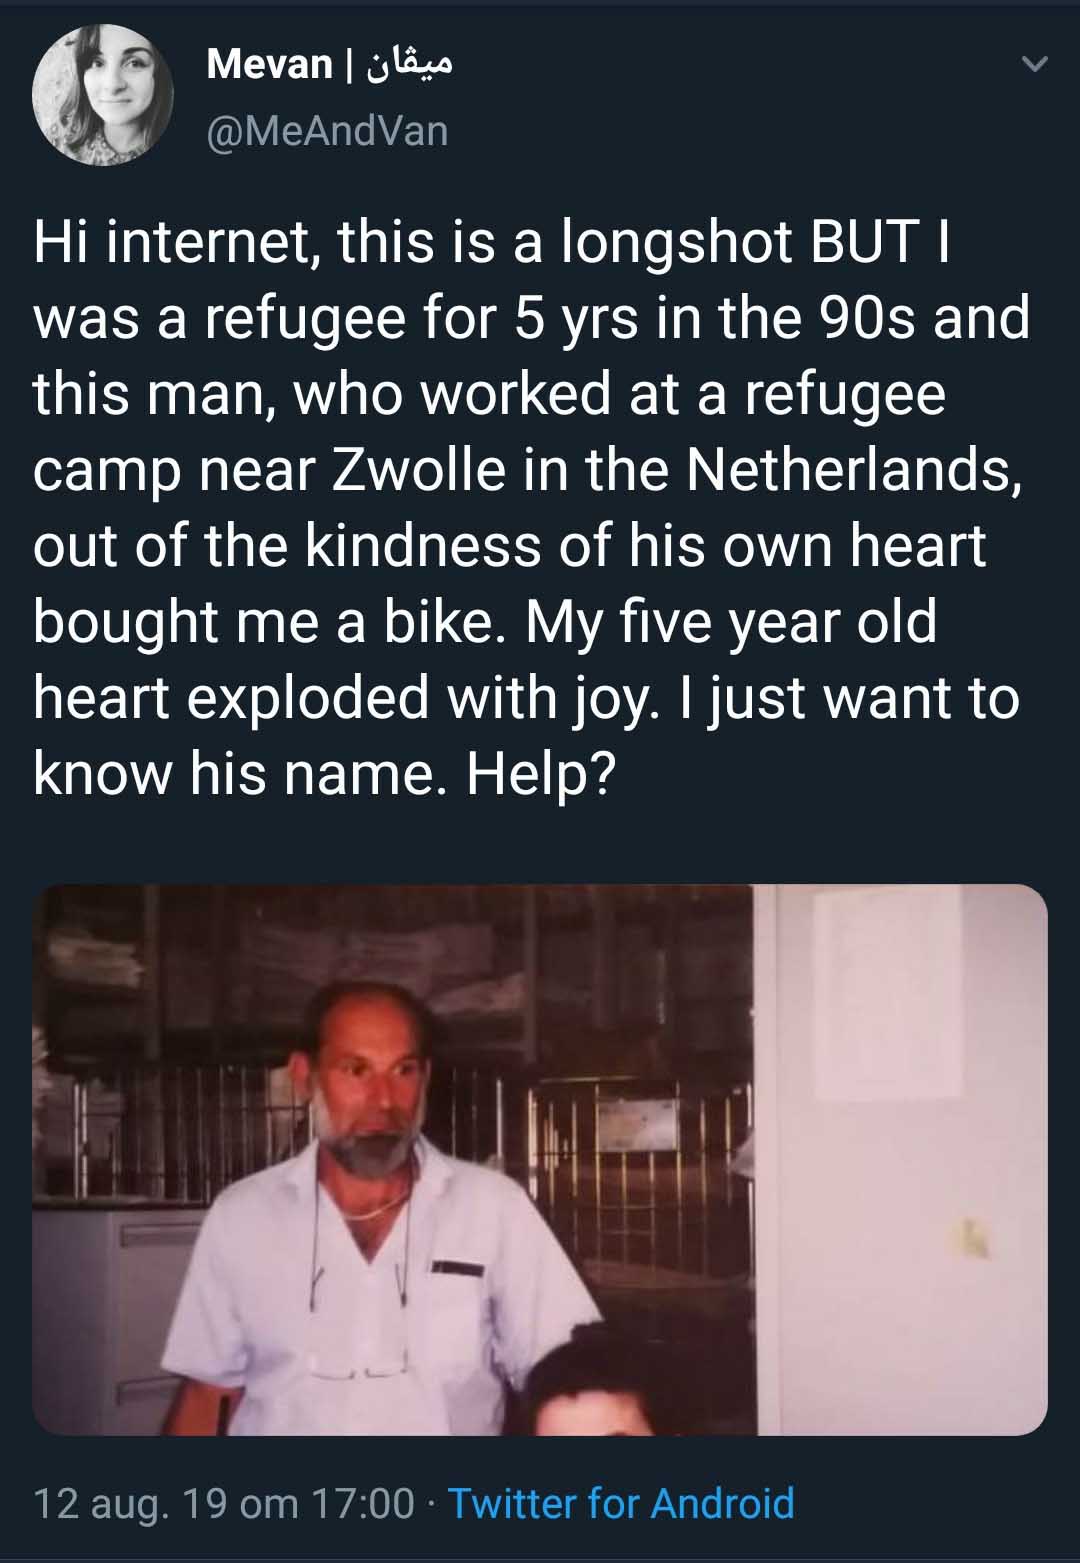 Mevan Hi internet, this is a longshot But I was a refugee for 5 yrs in the 90s and this man, who worked at a refugee camp near Zwolle in the Netherlands, out of the kindness of his own heart bought me a bike. My five year old heart exploded with